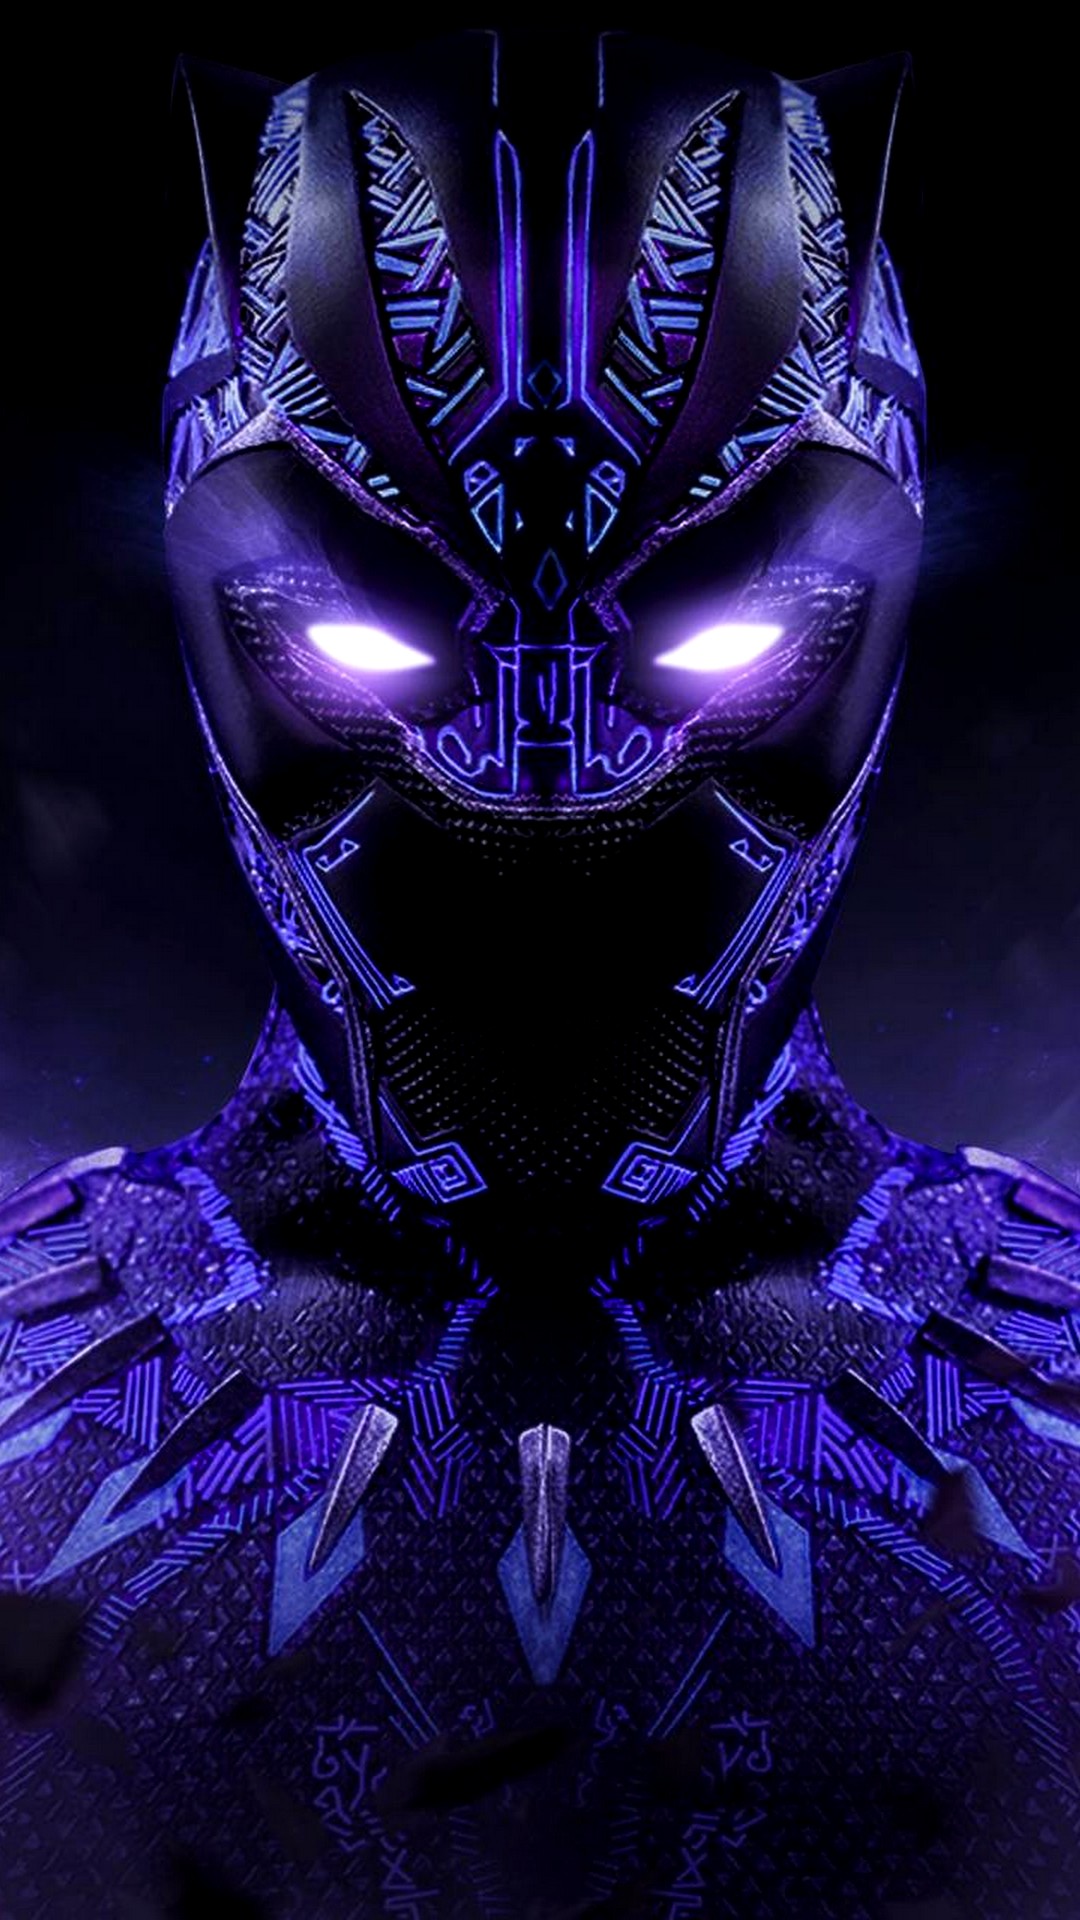 Black Panther Wallpaper for iPhone With high-resolution 1080X1920 pixel. You can use this wallpaper for your iPhone 5, 6, 7, 8, X, XS, XR backgrounds, Mobile Screensaver, or iPad Lock Screen